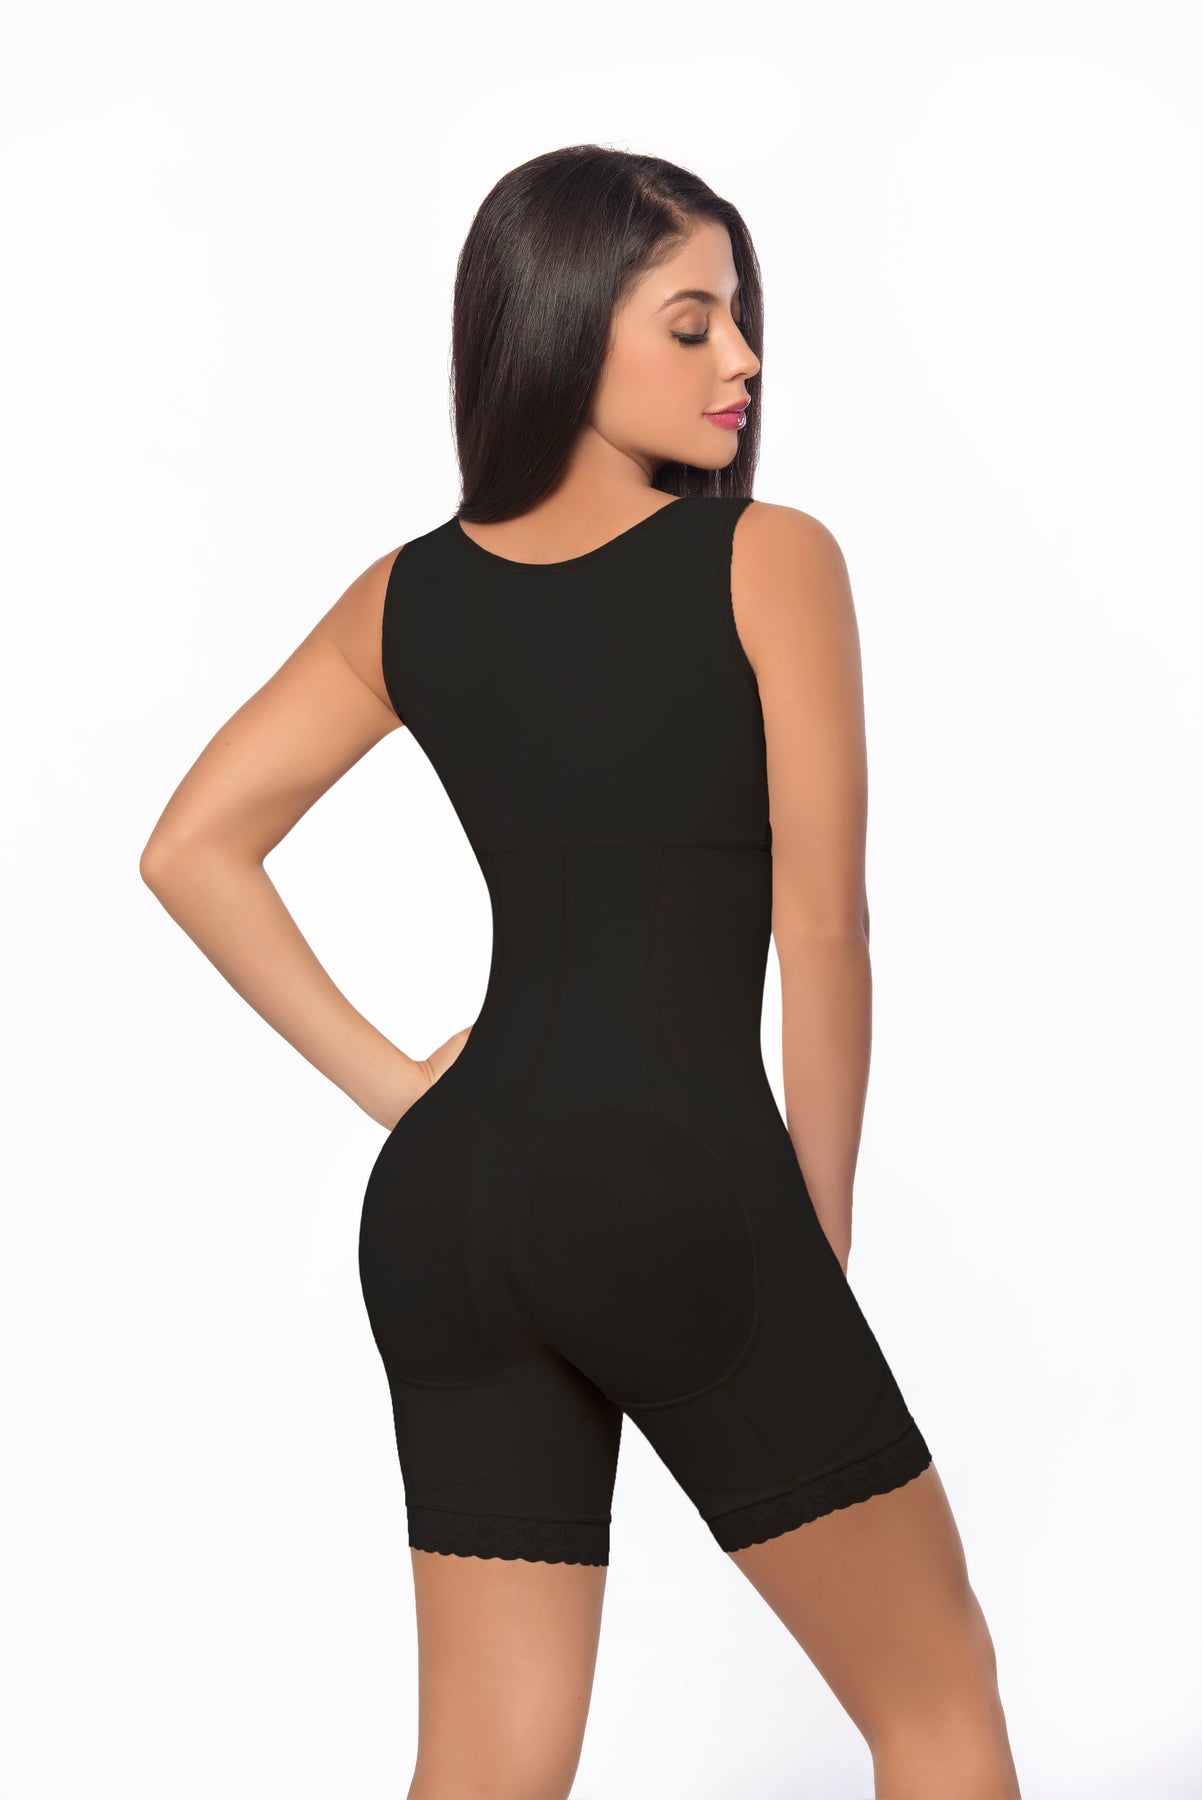 BRALESS FULL BODY MID THIGH FAJA WITH HOOK CLOSURE – Contour Fajas NG